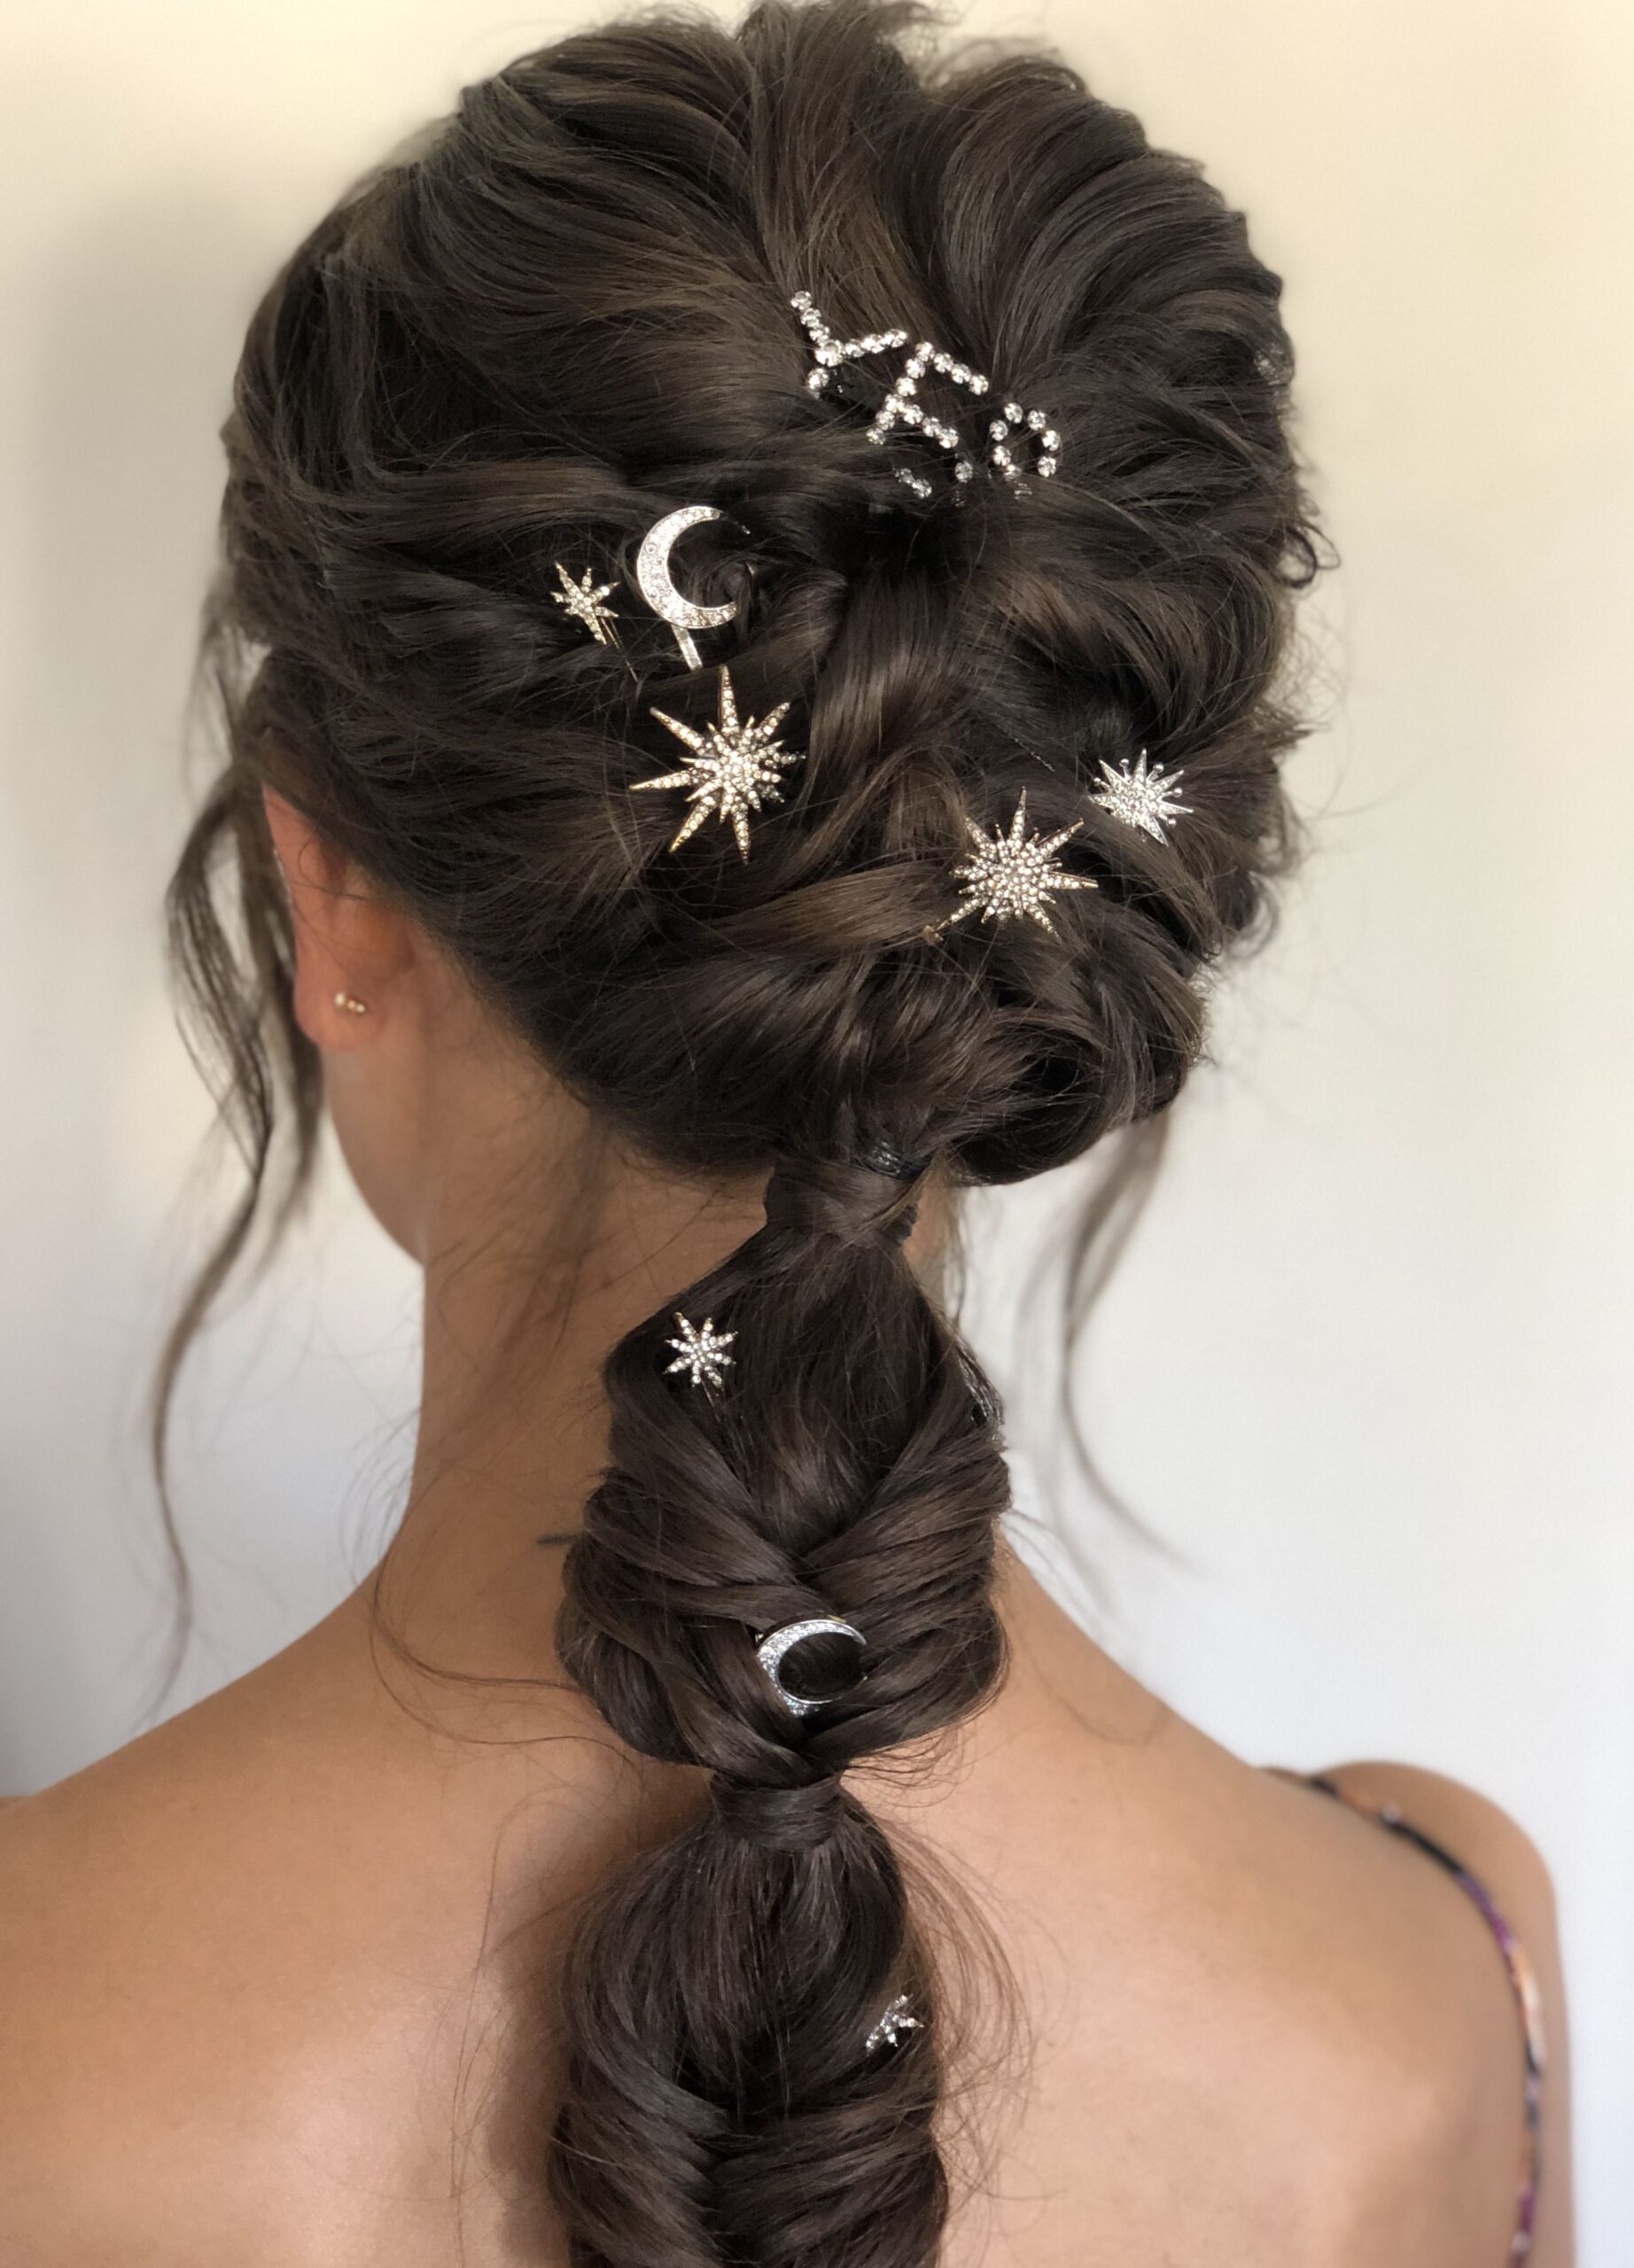 Chic and Trendy Wedding Hairstyle Inspirations for Brides